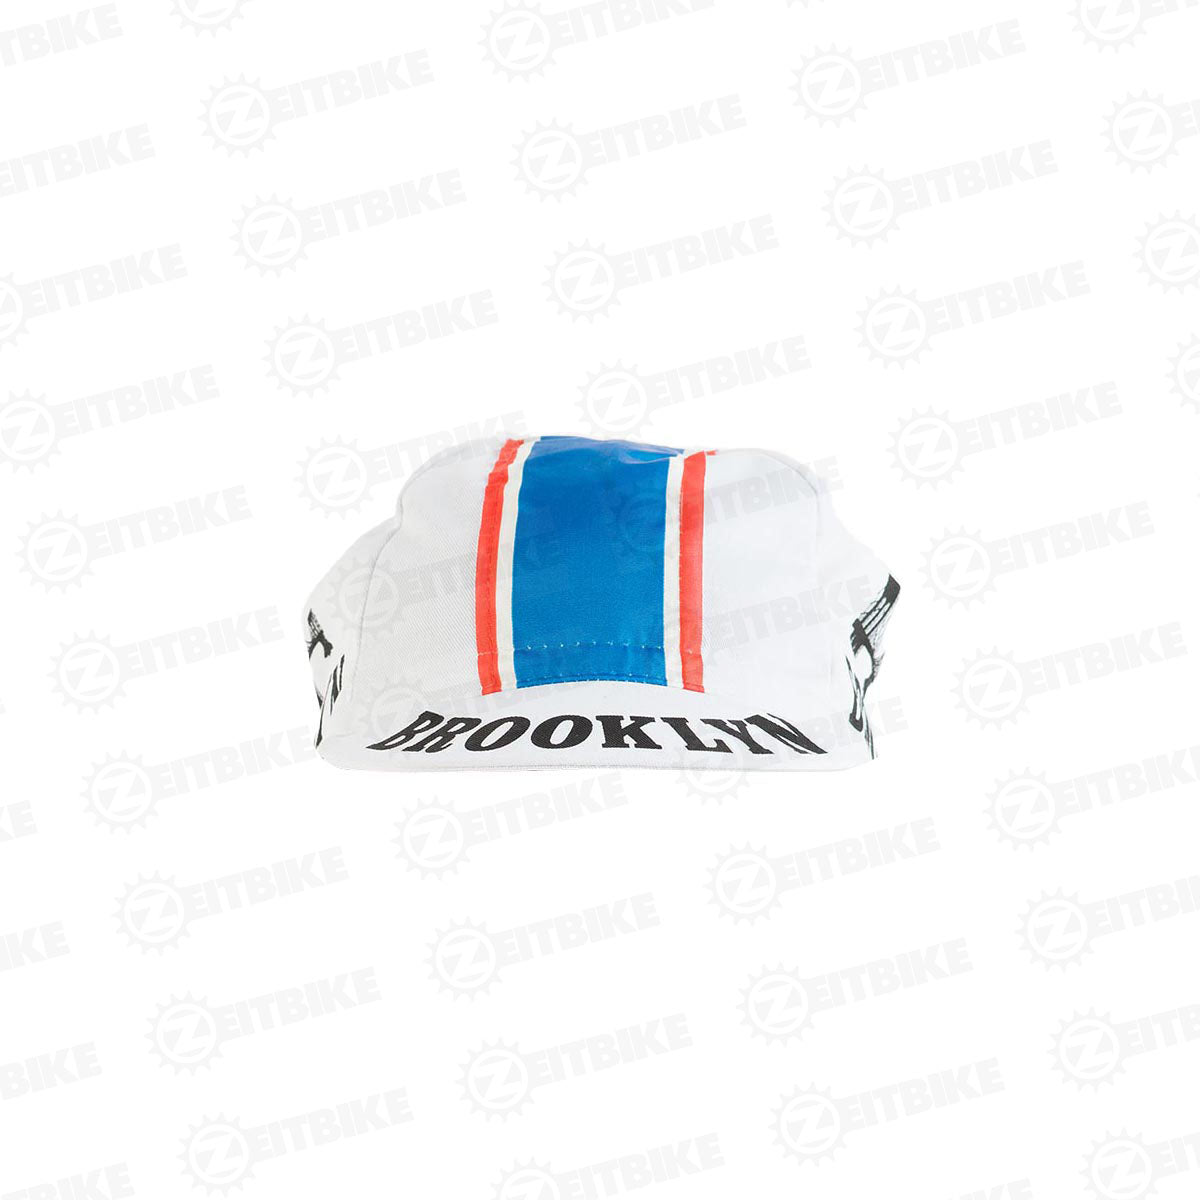 ZEITBIKE - Vintage Cycling Cap - Brooklyn - White |  | Anti Sweat Caps | for Stand Alone or Under Helmet | Team Jersey Cap Outdoor Cap